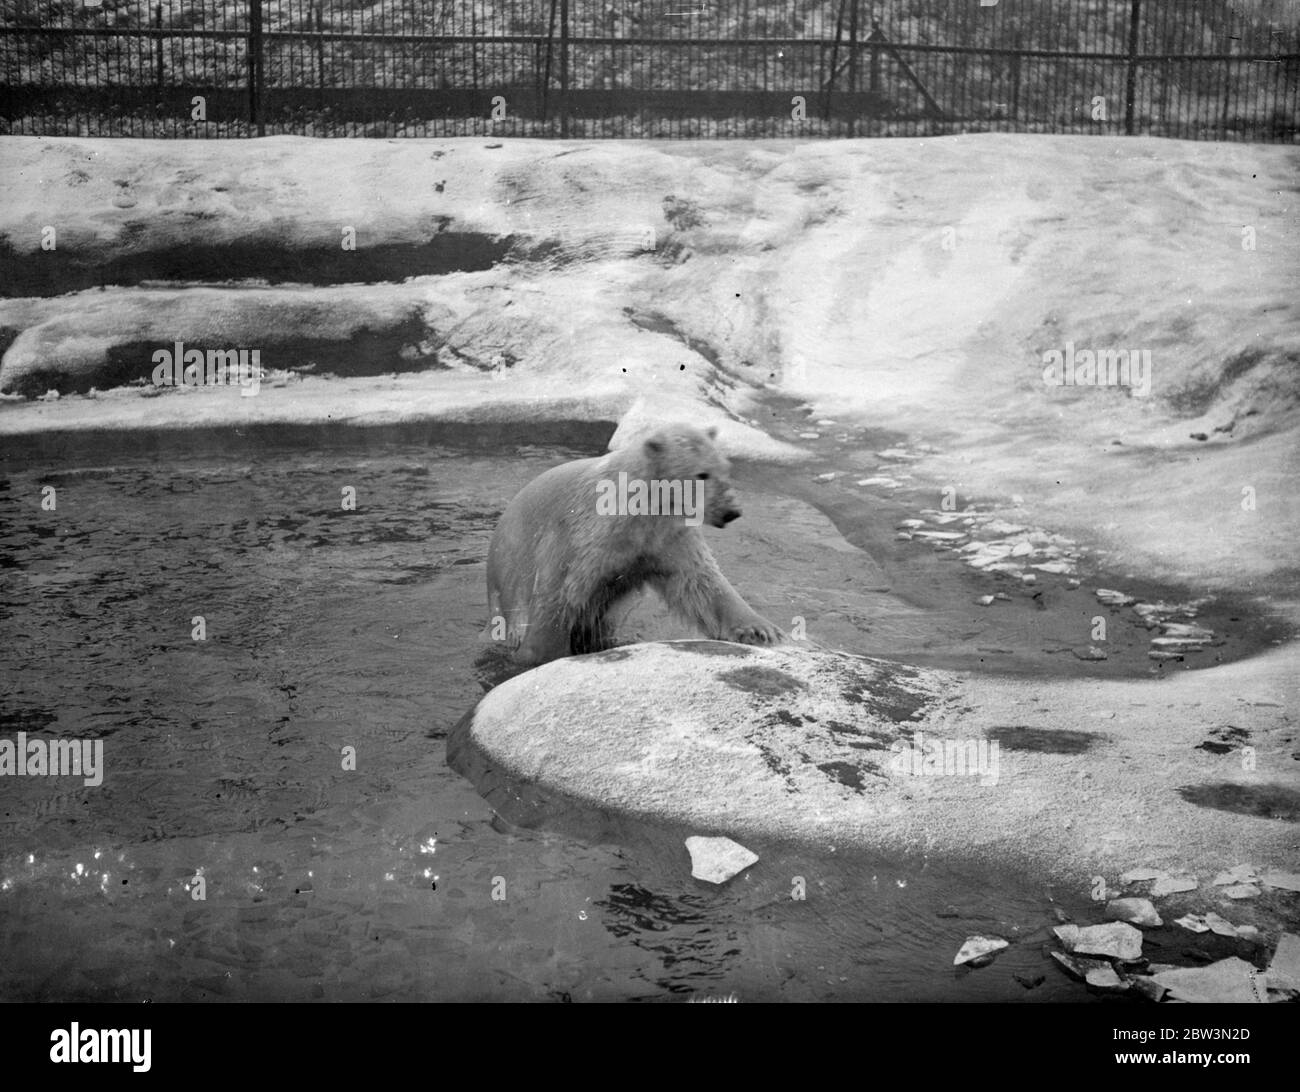 This weather is just right for the Whipsnade polar bears . Sam and Barbara , the polar bears at the Whipsnade Zoo is covered thickly with snow and the bears pond has a coting of ice . It ' s just like home for Sam and Barbara ! . Photo shows , Sam scrambling out of the water after a dip in his ice covered pond . 20 December 1935 Stock Photo